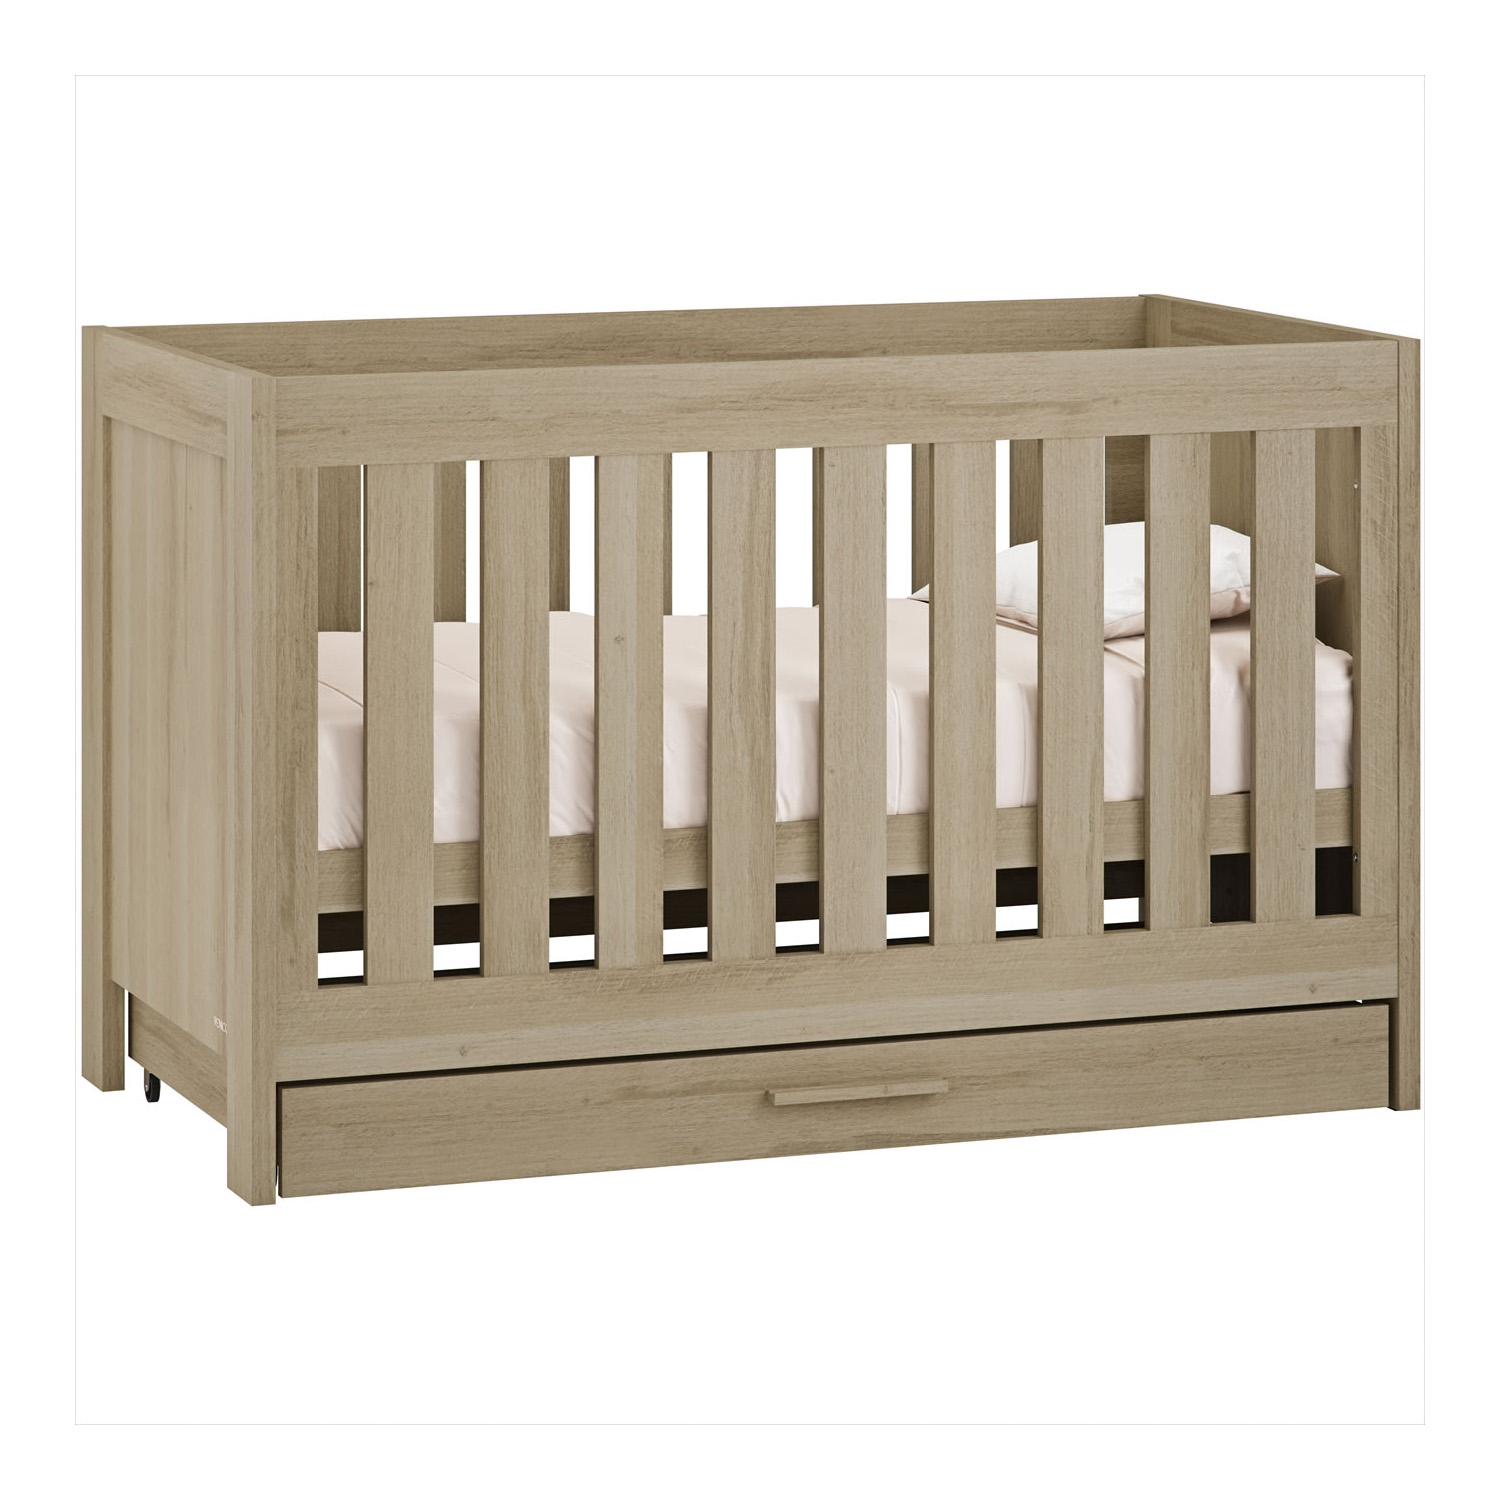 Venicci Forenzo Cot Bed with Underdrawer